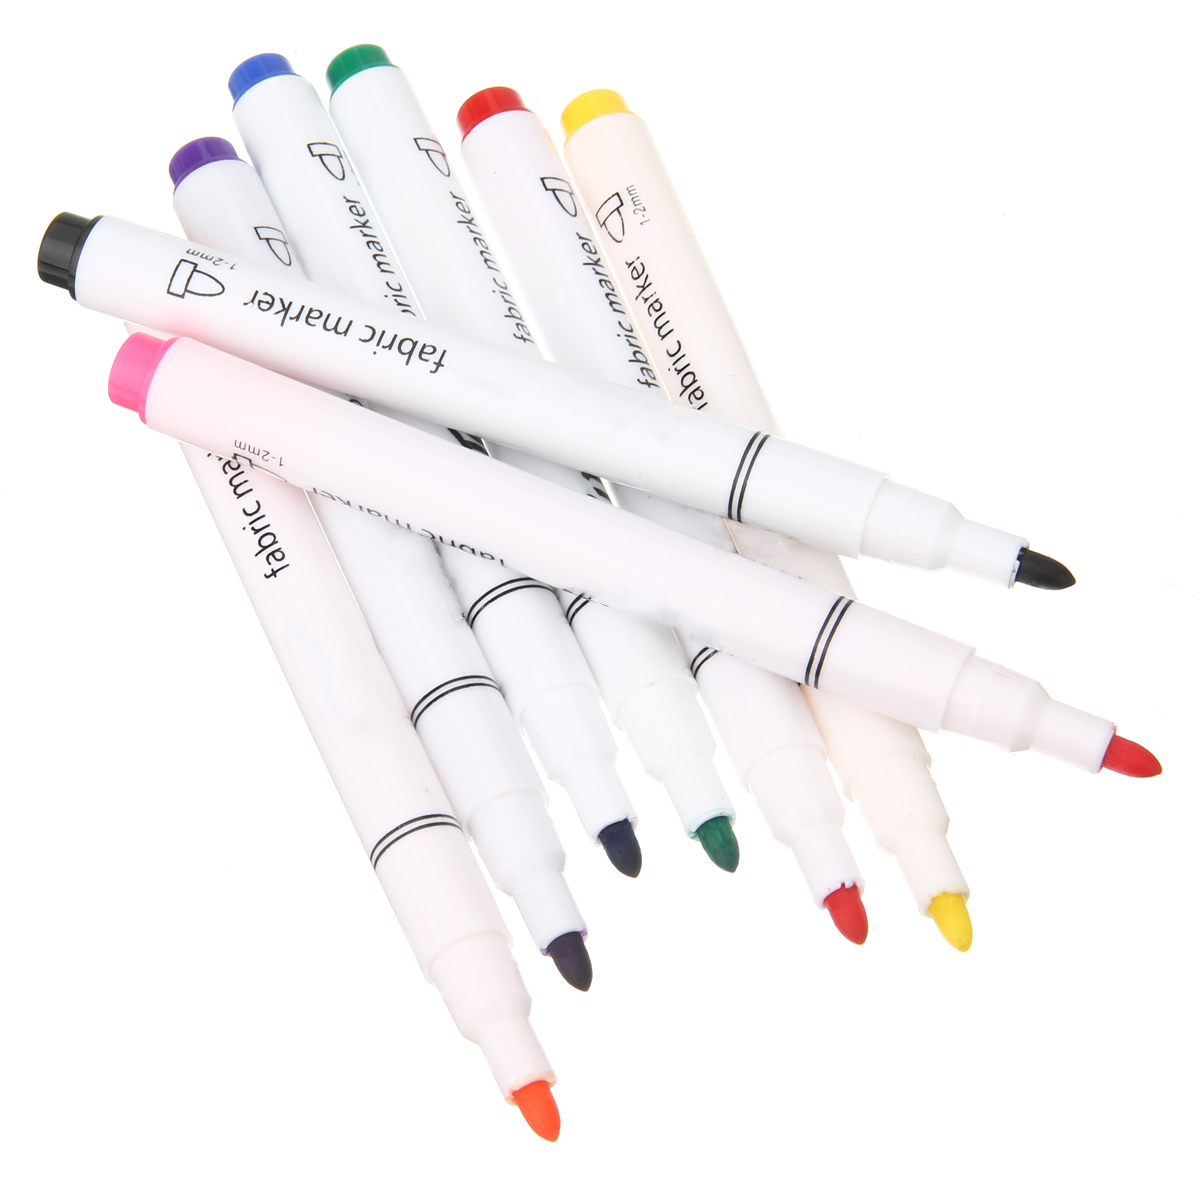 8 Piece Multicolor Clothes Textile Markers Fabric Pens Arts Crafts DIY T-shirt Painting Pen For Student Child Writing Supplies